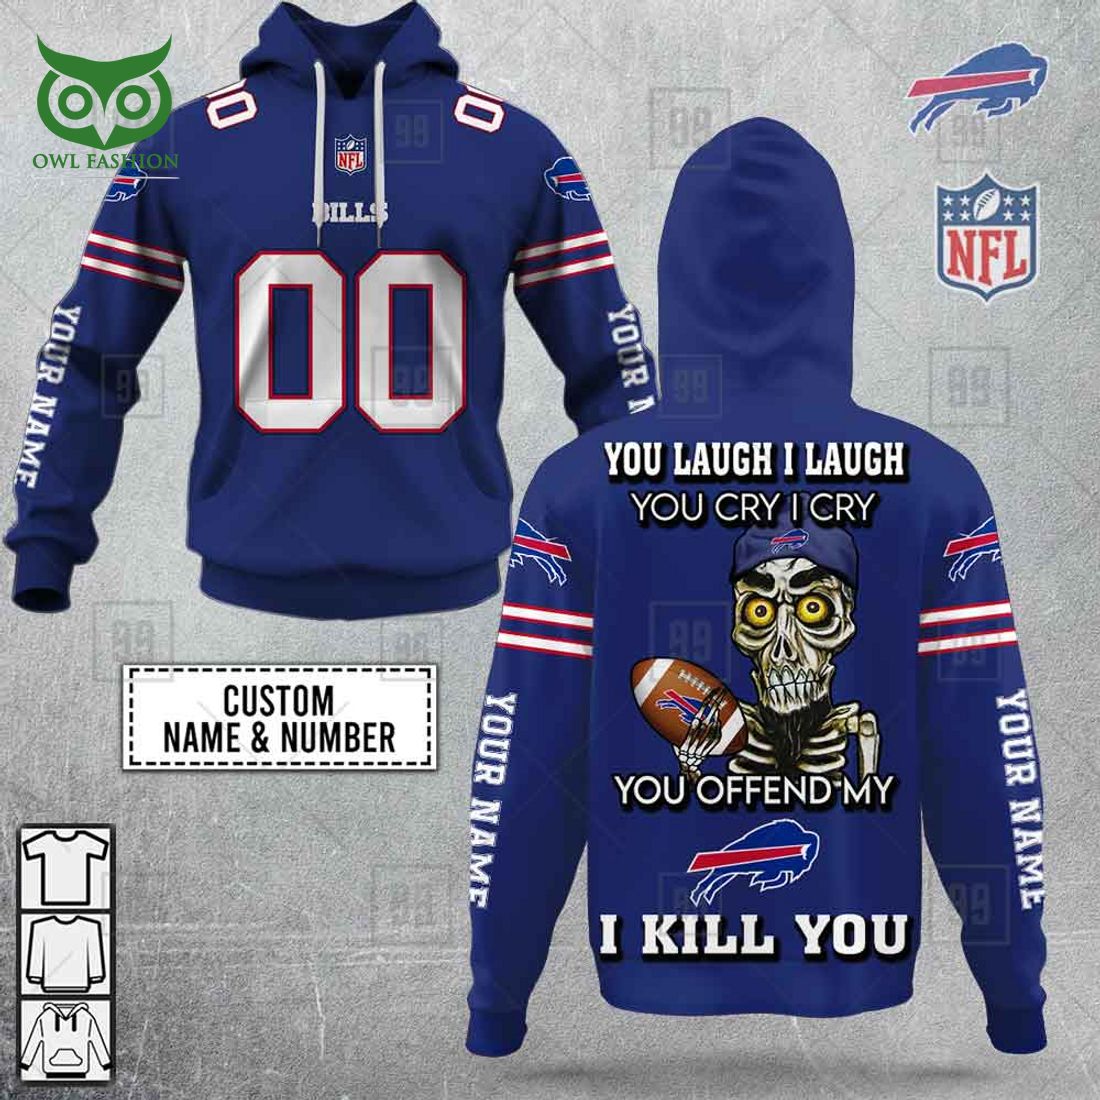 nfl jersey with hoodie